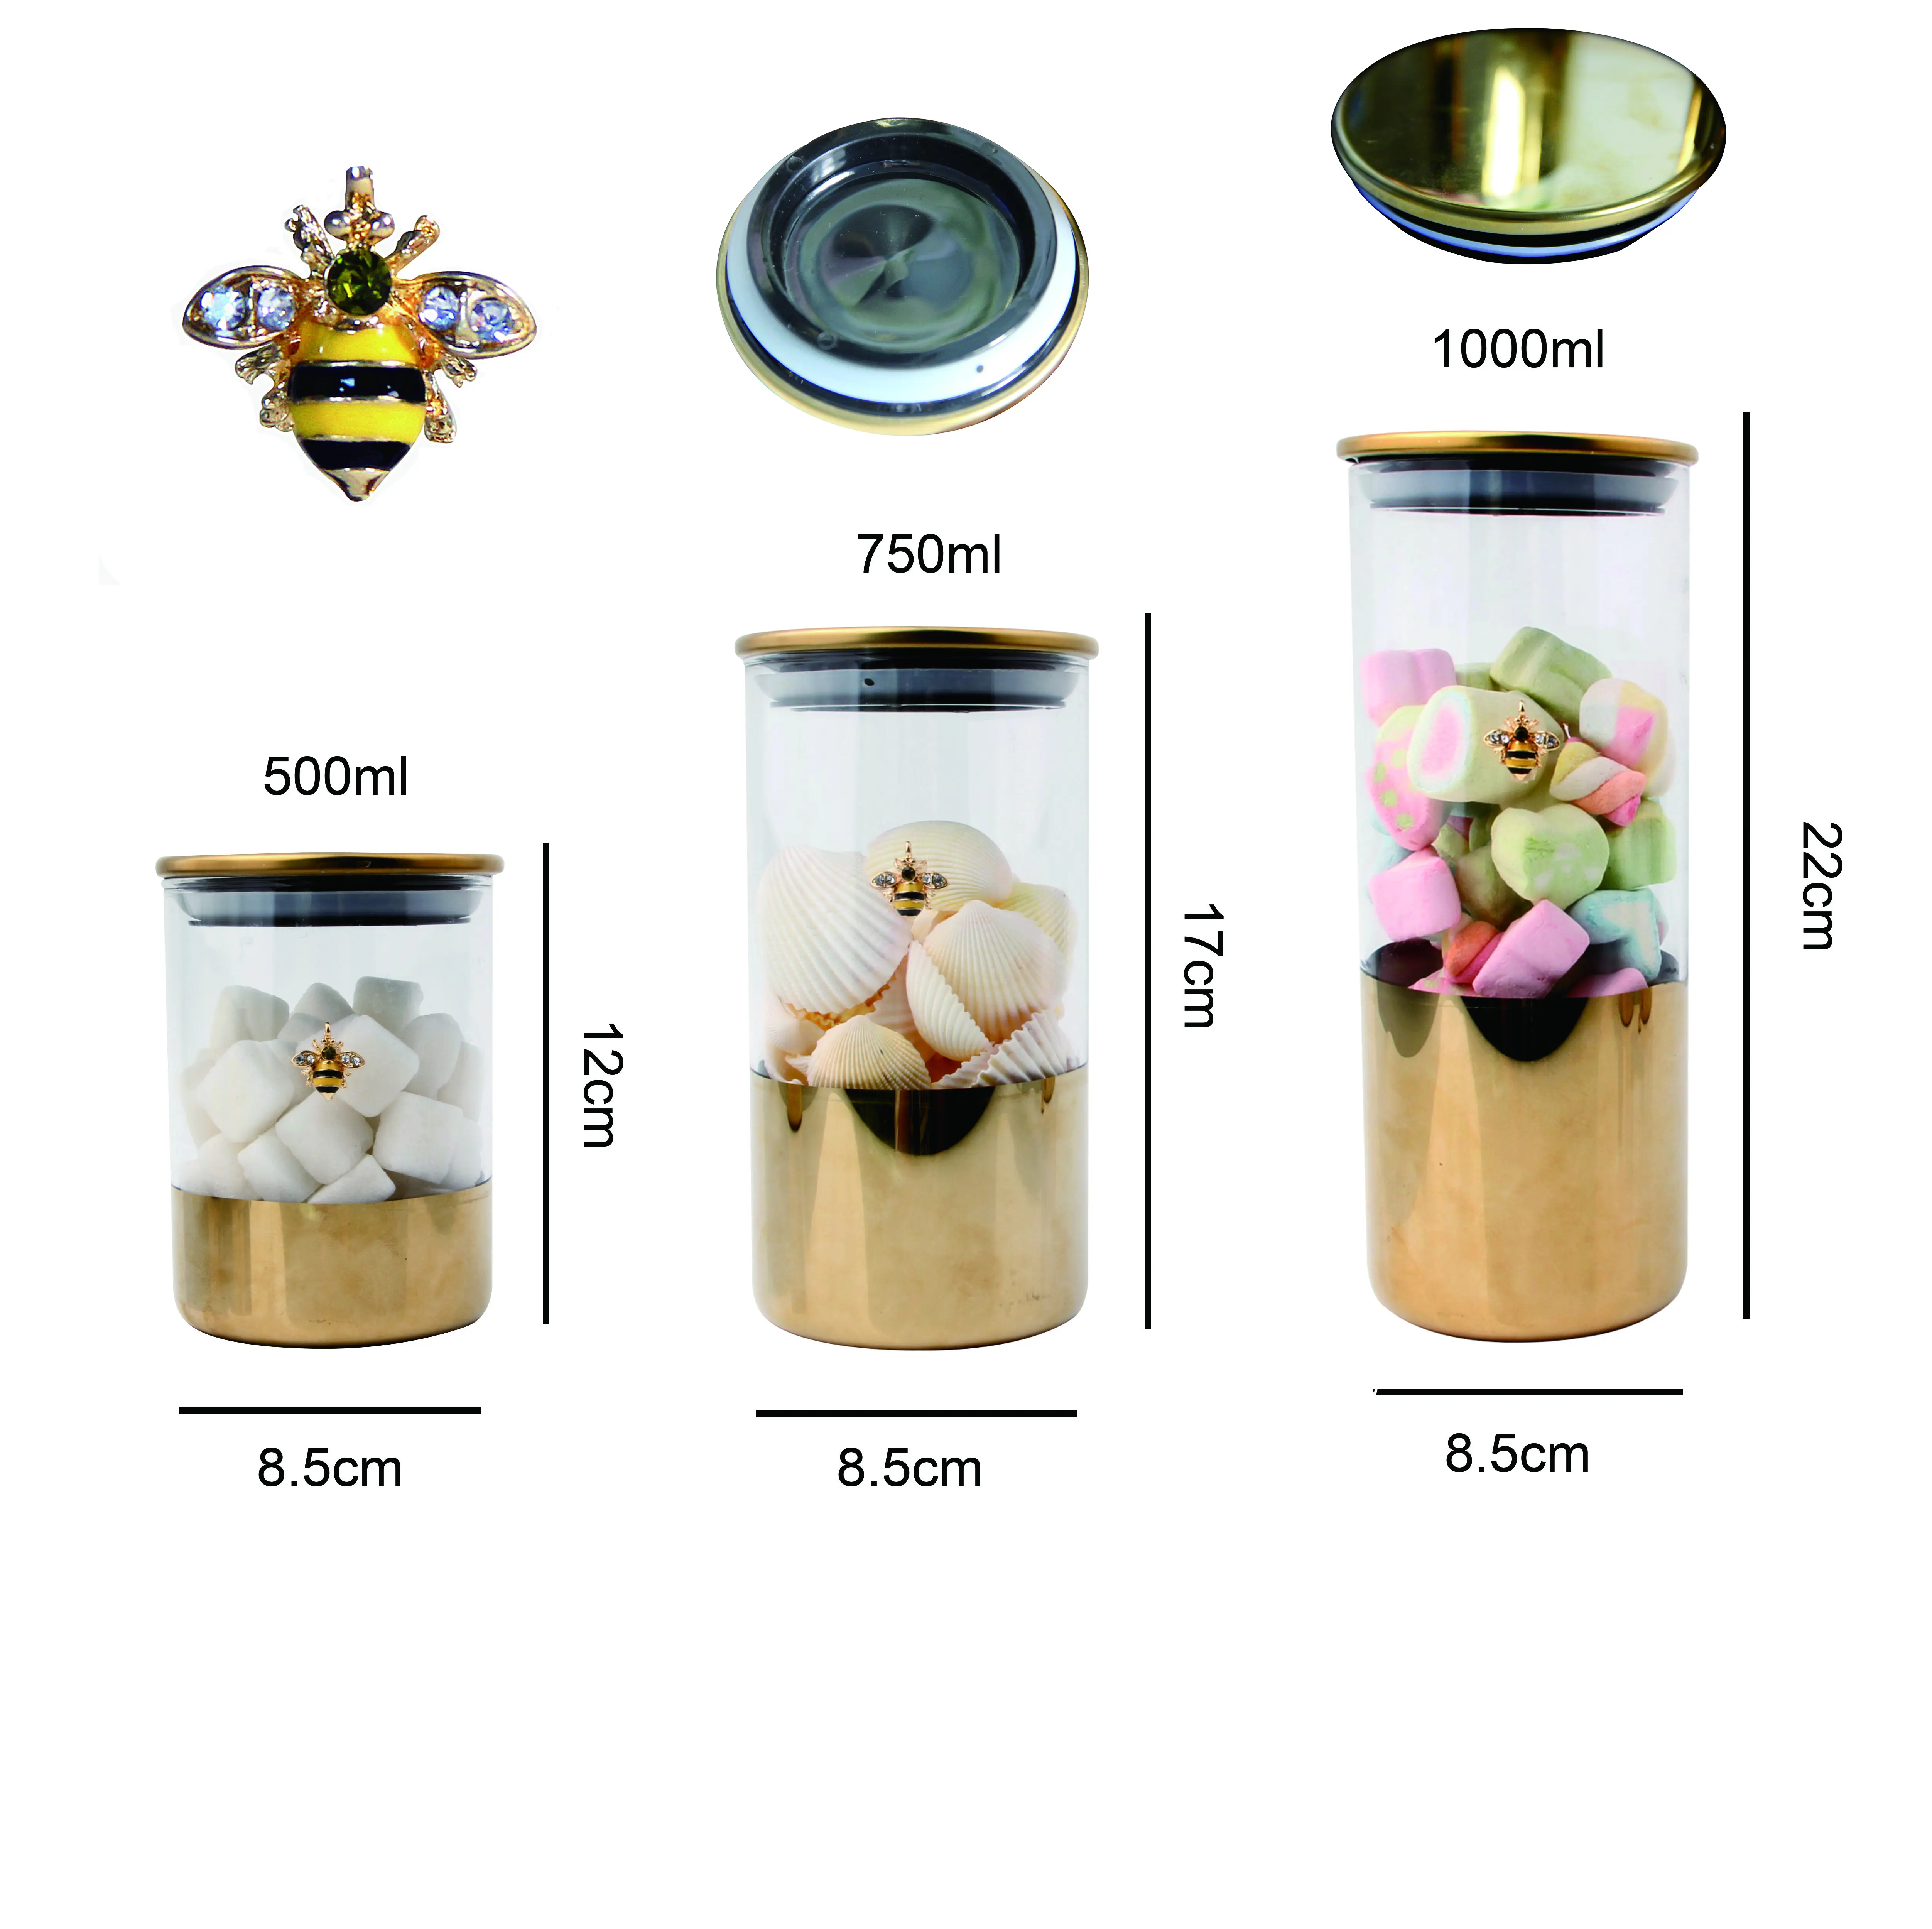 Hotsale new design gold fashion bee high borosilicate glass candy storage jar container with gold metal lid for kitchen storage